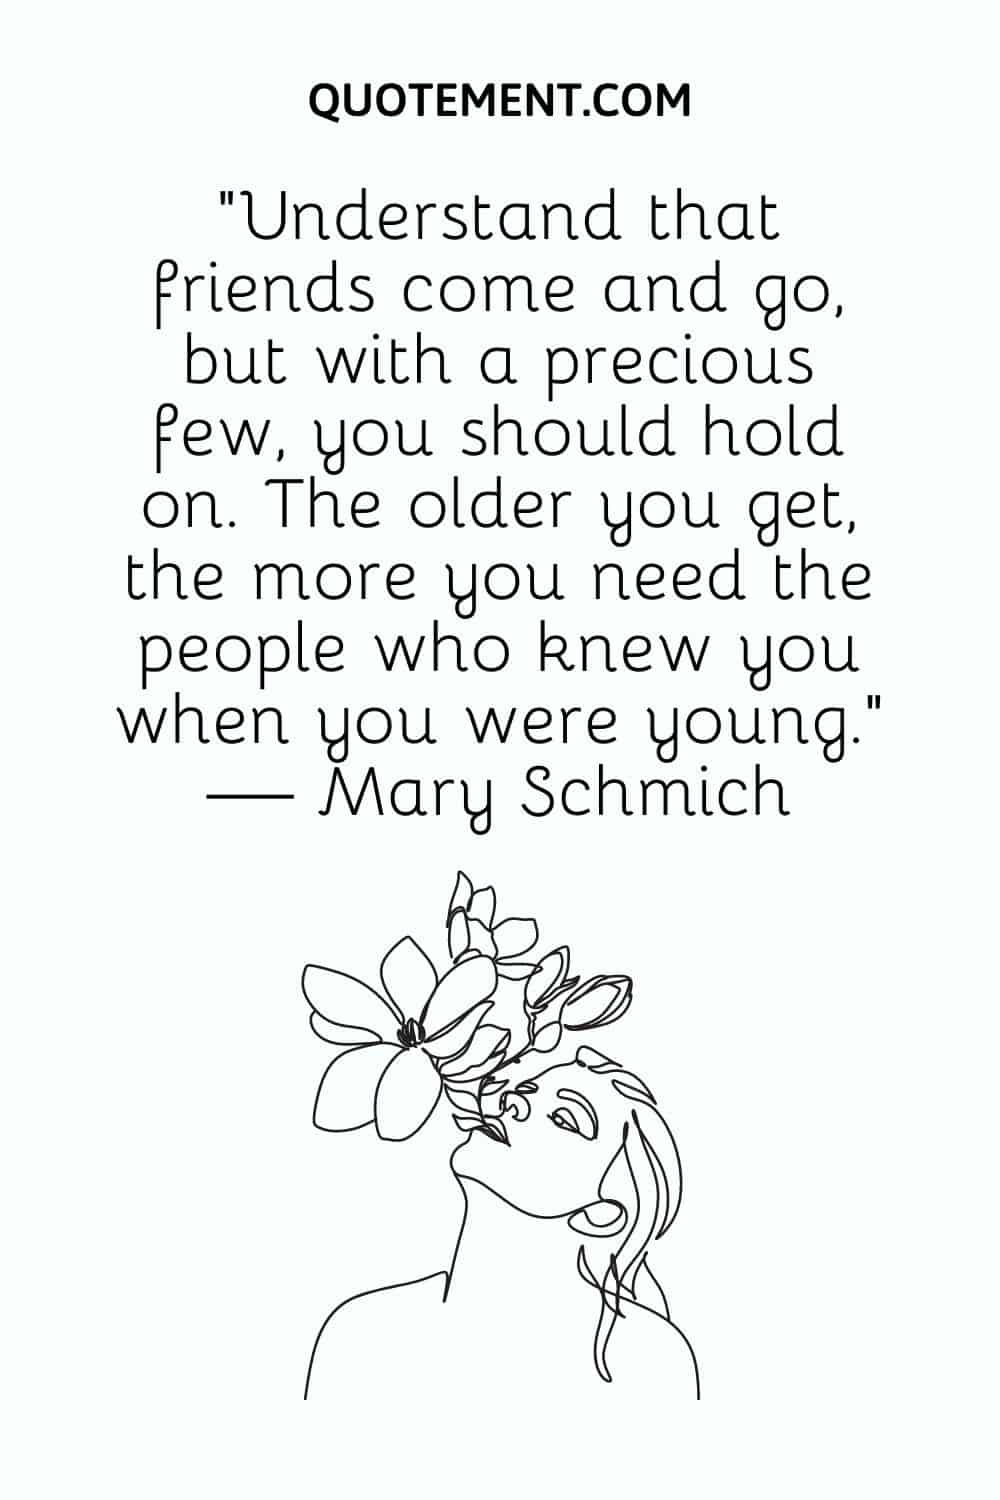 Understand that friends come and go, but with a precious few, you should hold on.